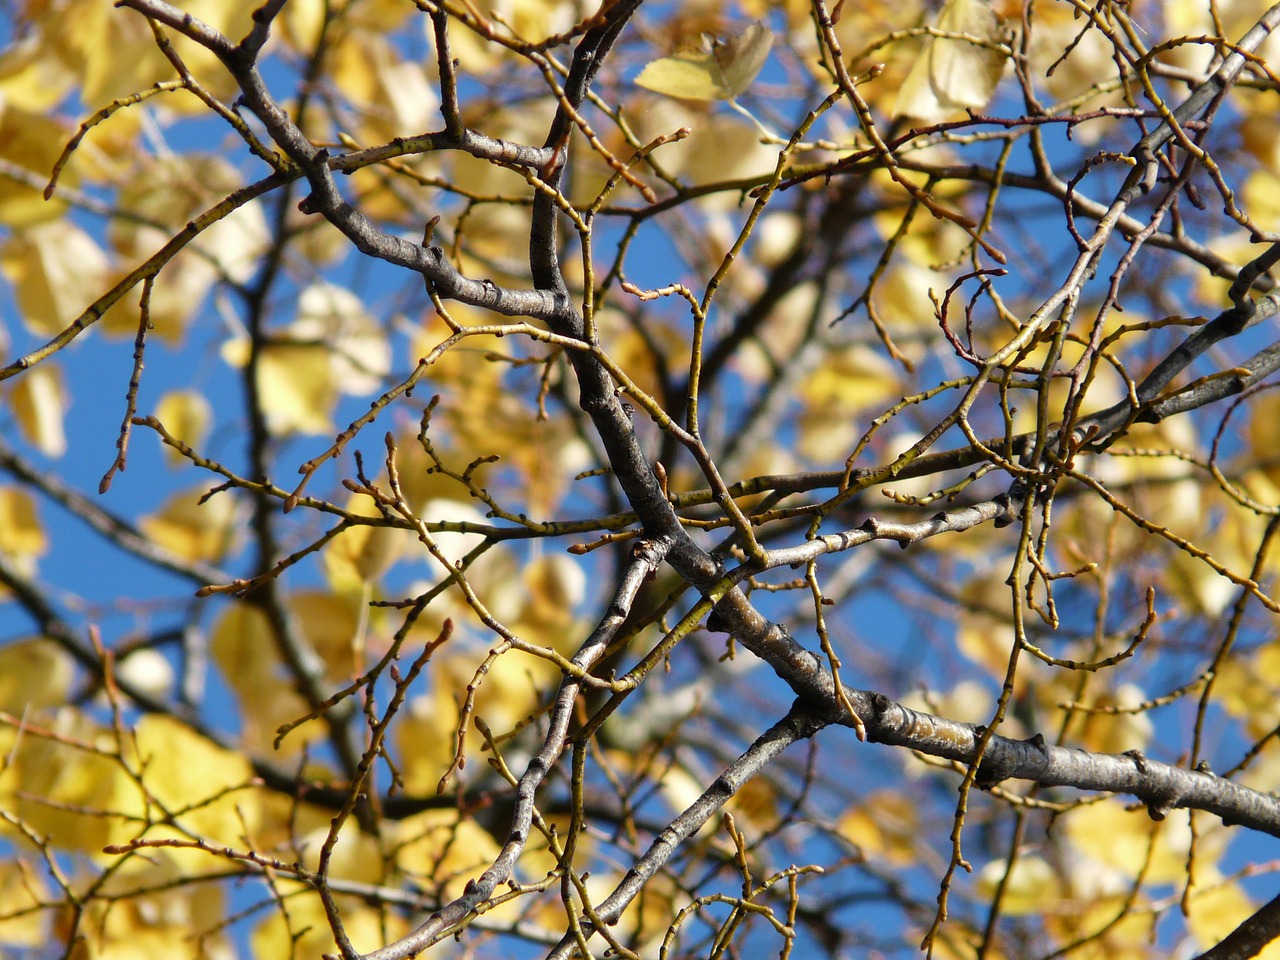 aesthetic,autumn,leaves,fall leaves,tree,coloring,golden,sky,branch,branches,autumn forest,fall foliage,free pictures, free photos, free images, royalty free, free illustrations, public domain